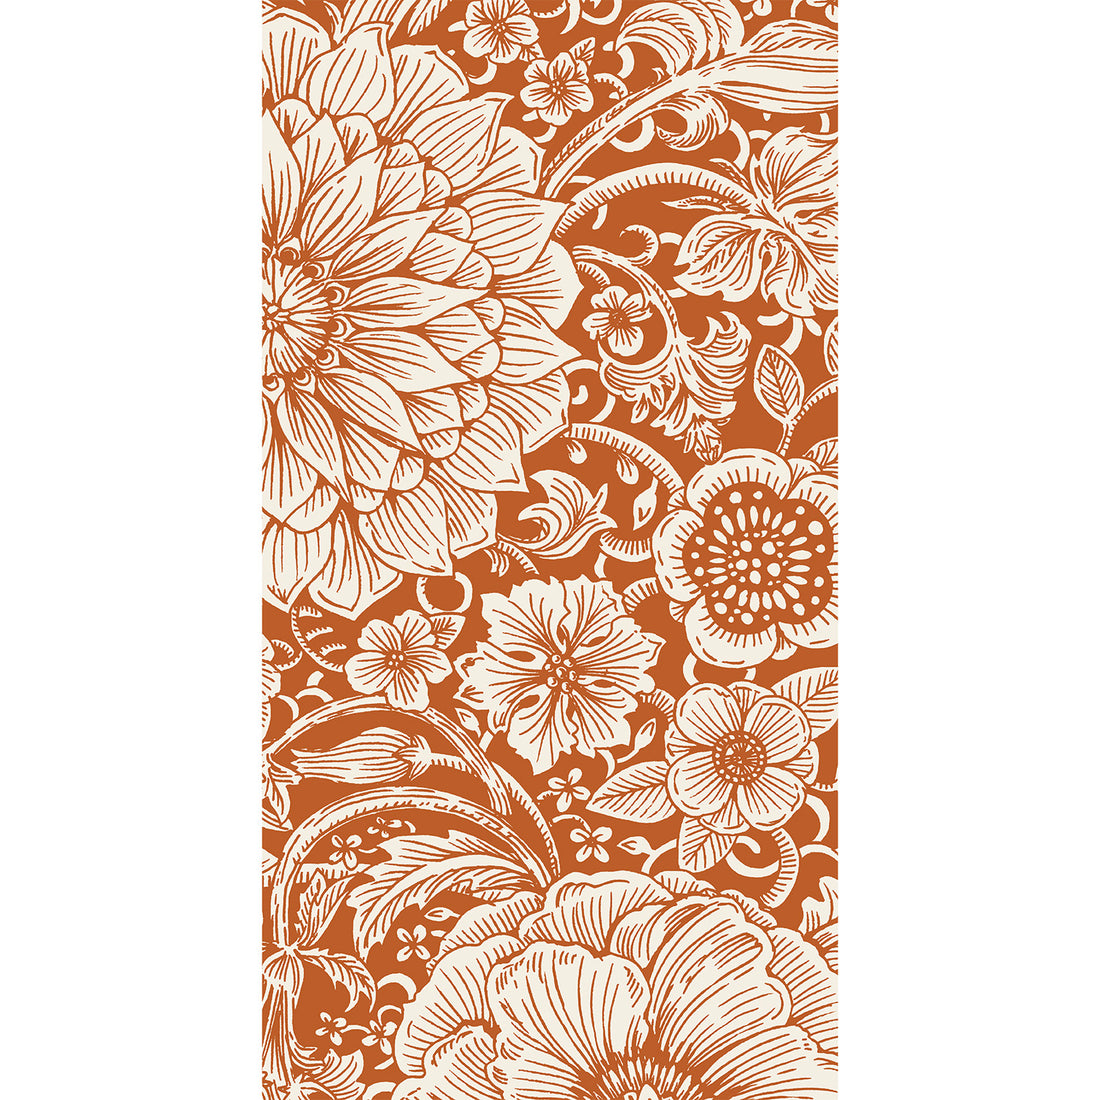 A rectangle guest napkin featuring a densely-packed engraving-style illustration of large and small white flowers surrounded by white foliage, on a deep orange background.